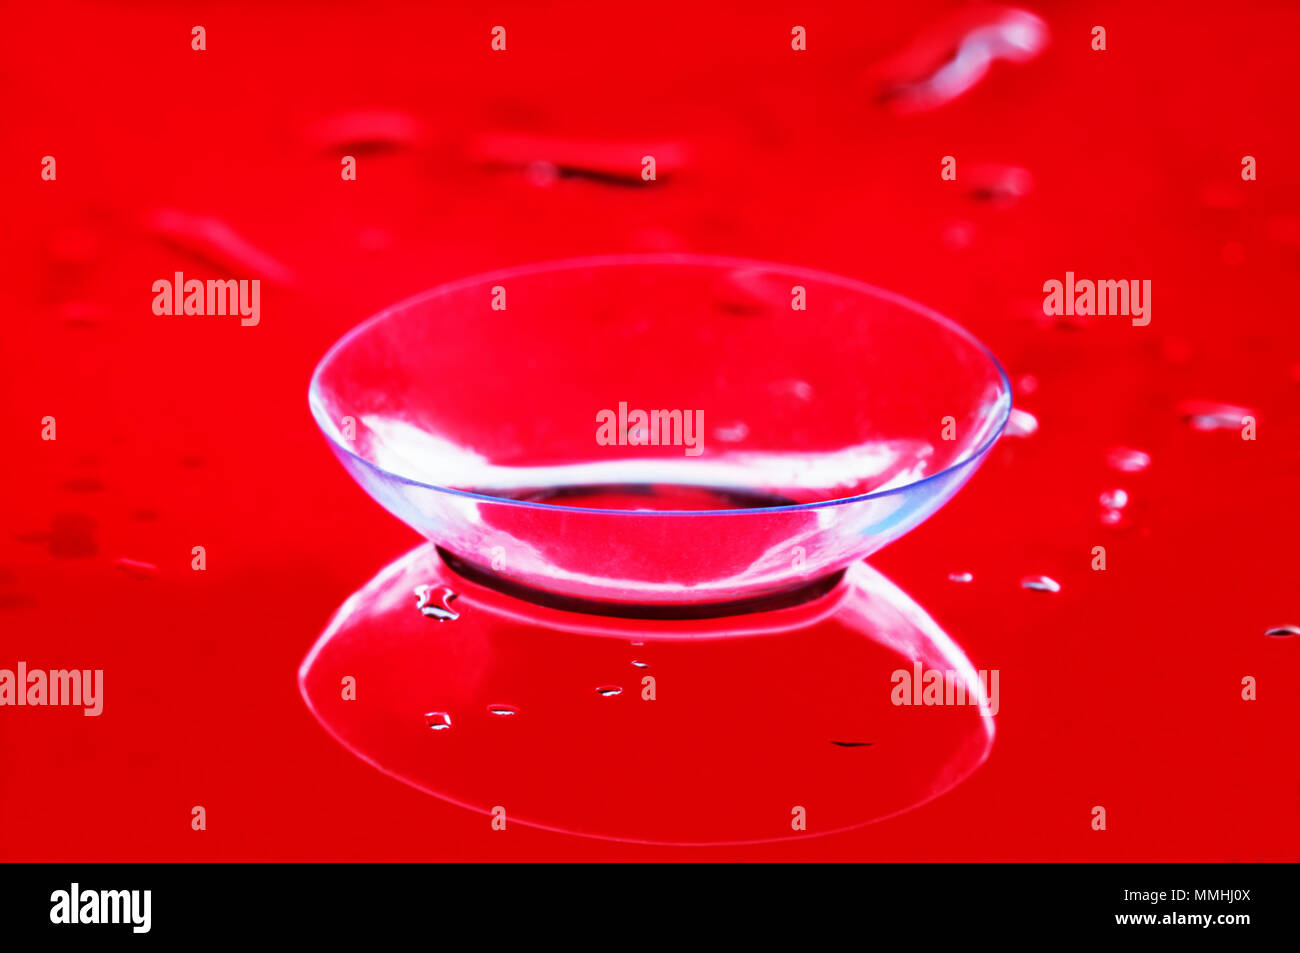 One transparent contact lens for correcting close-up view. Mirror wet surface, common red background Stock Photo